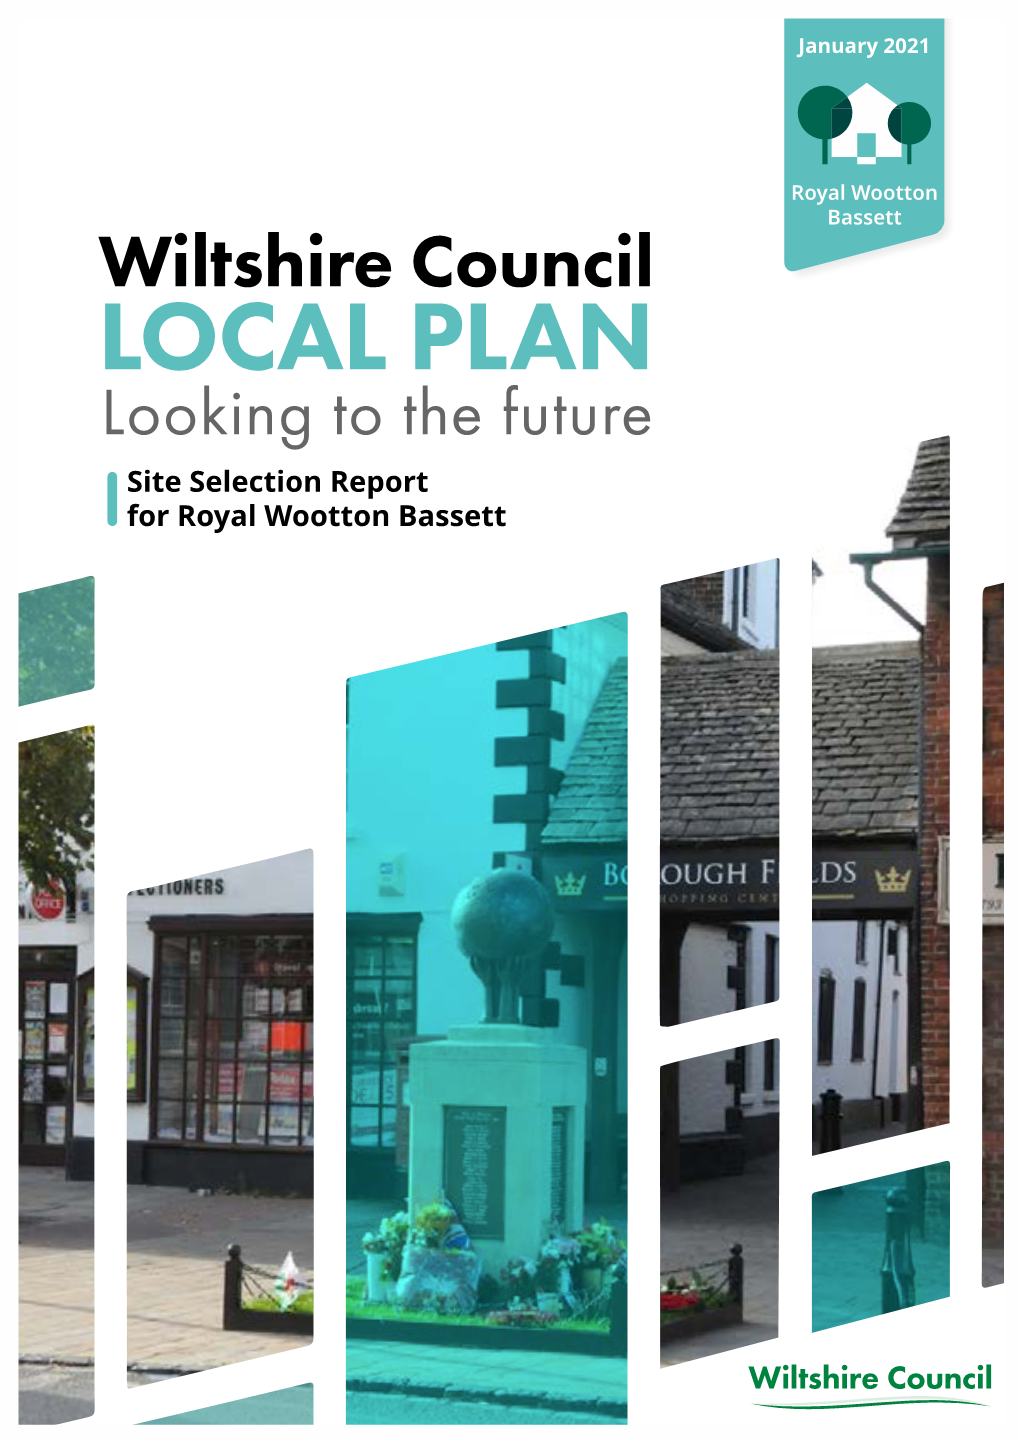 Site Selection Report for Royal Wootton Bassett